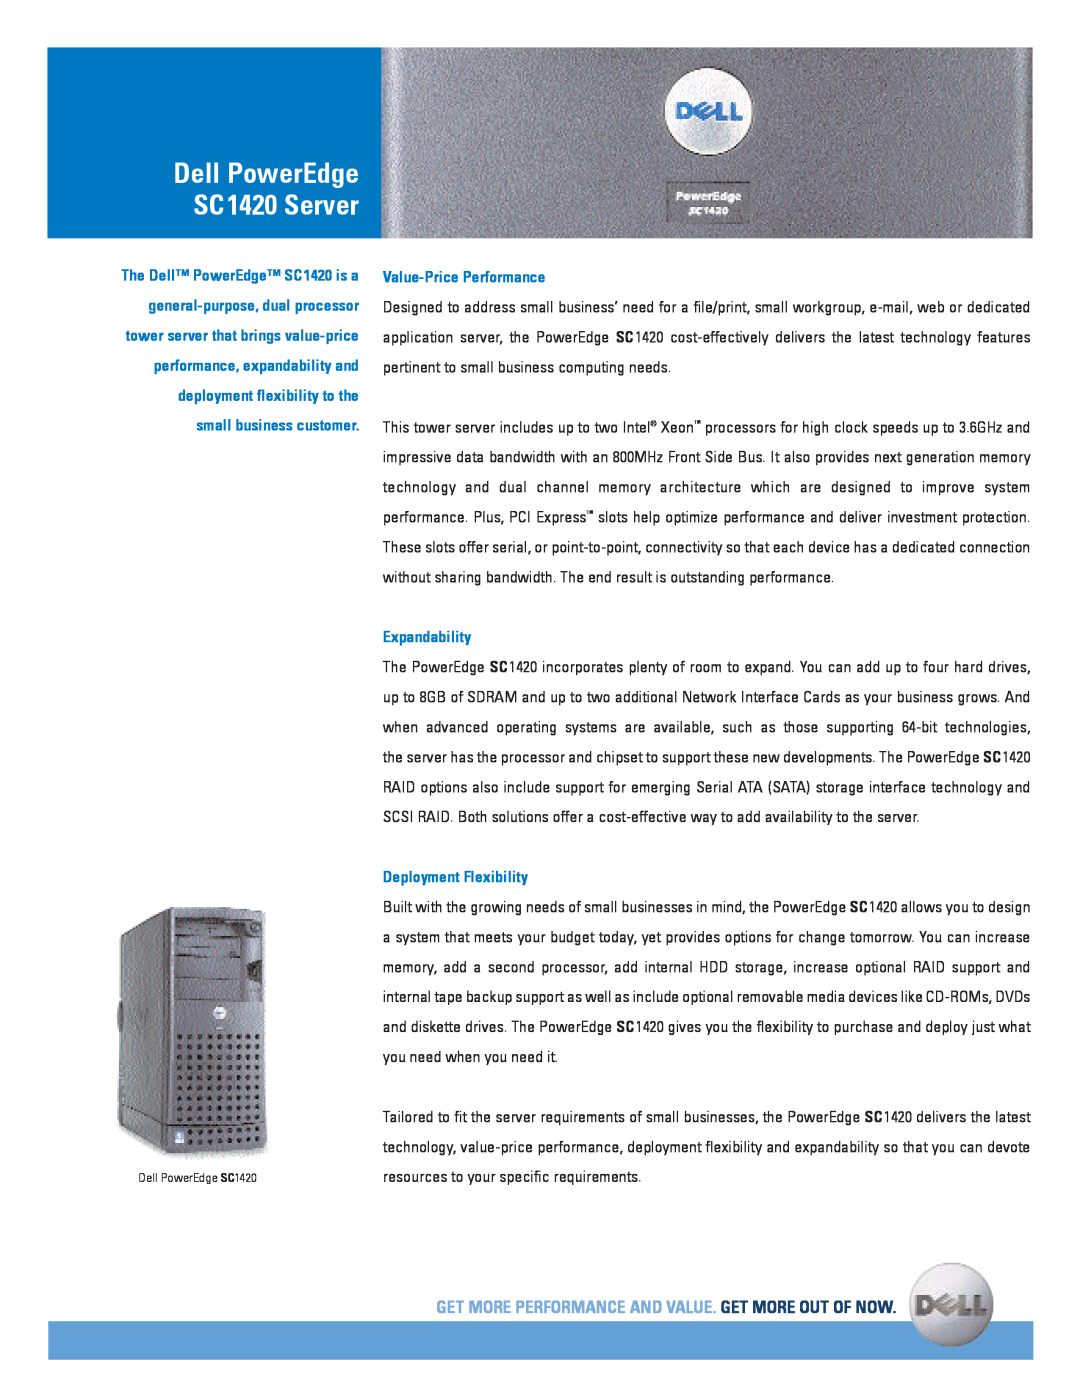 Dell SC1420 manual Get More Performance And Value. Get More Out Of Now, Value-Price Performance, Expandability 